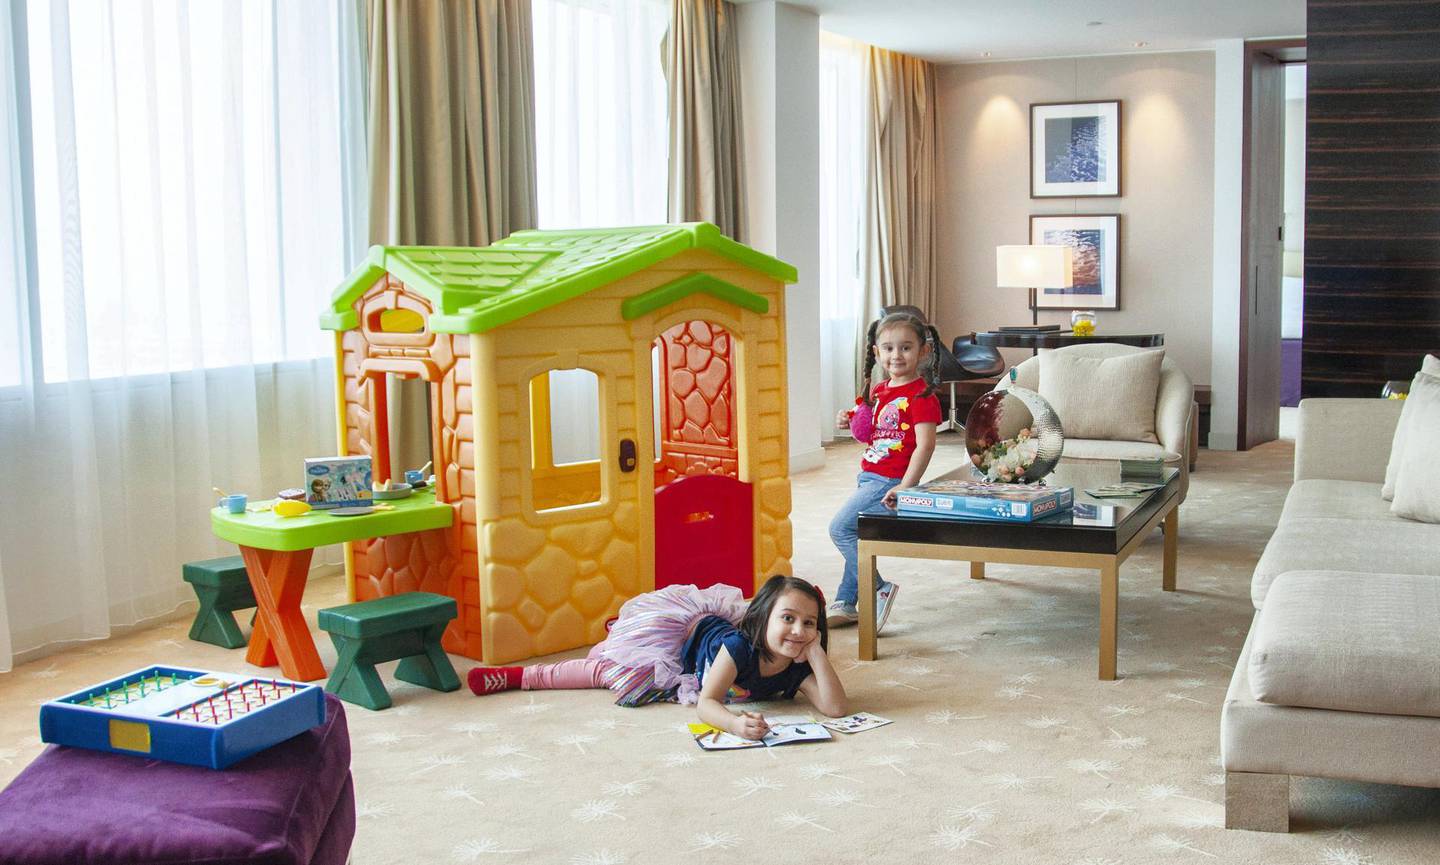 InterContinental Dubai Festival City has launched a playcation for families. Supplied 